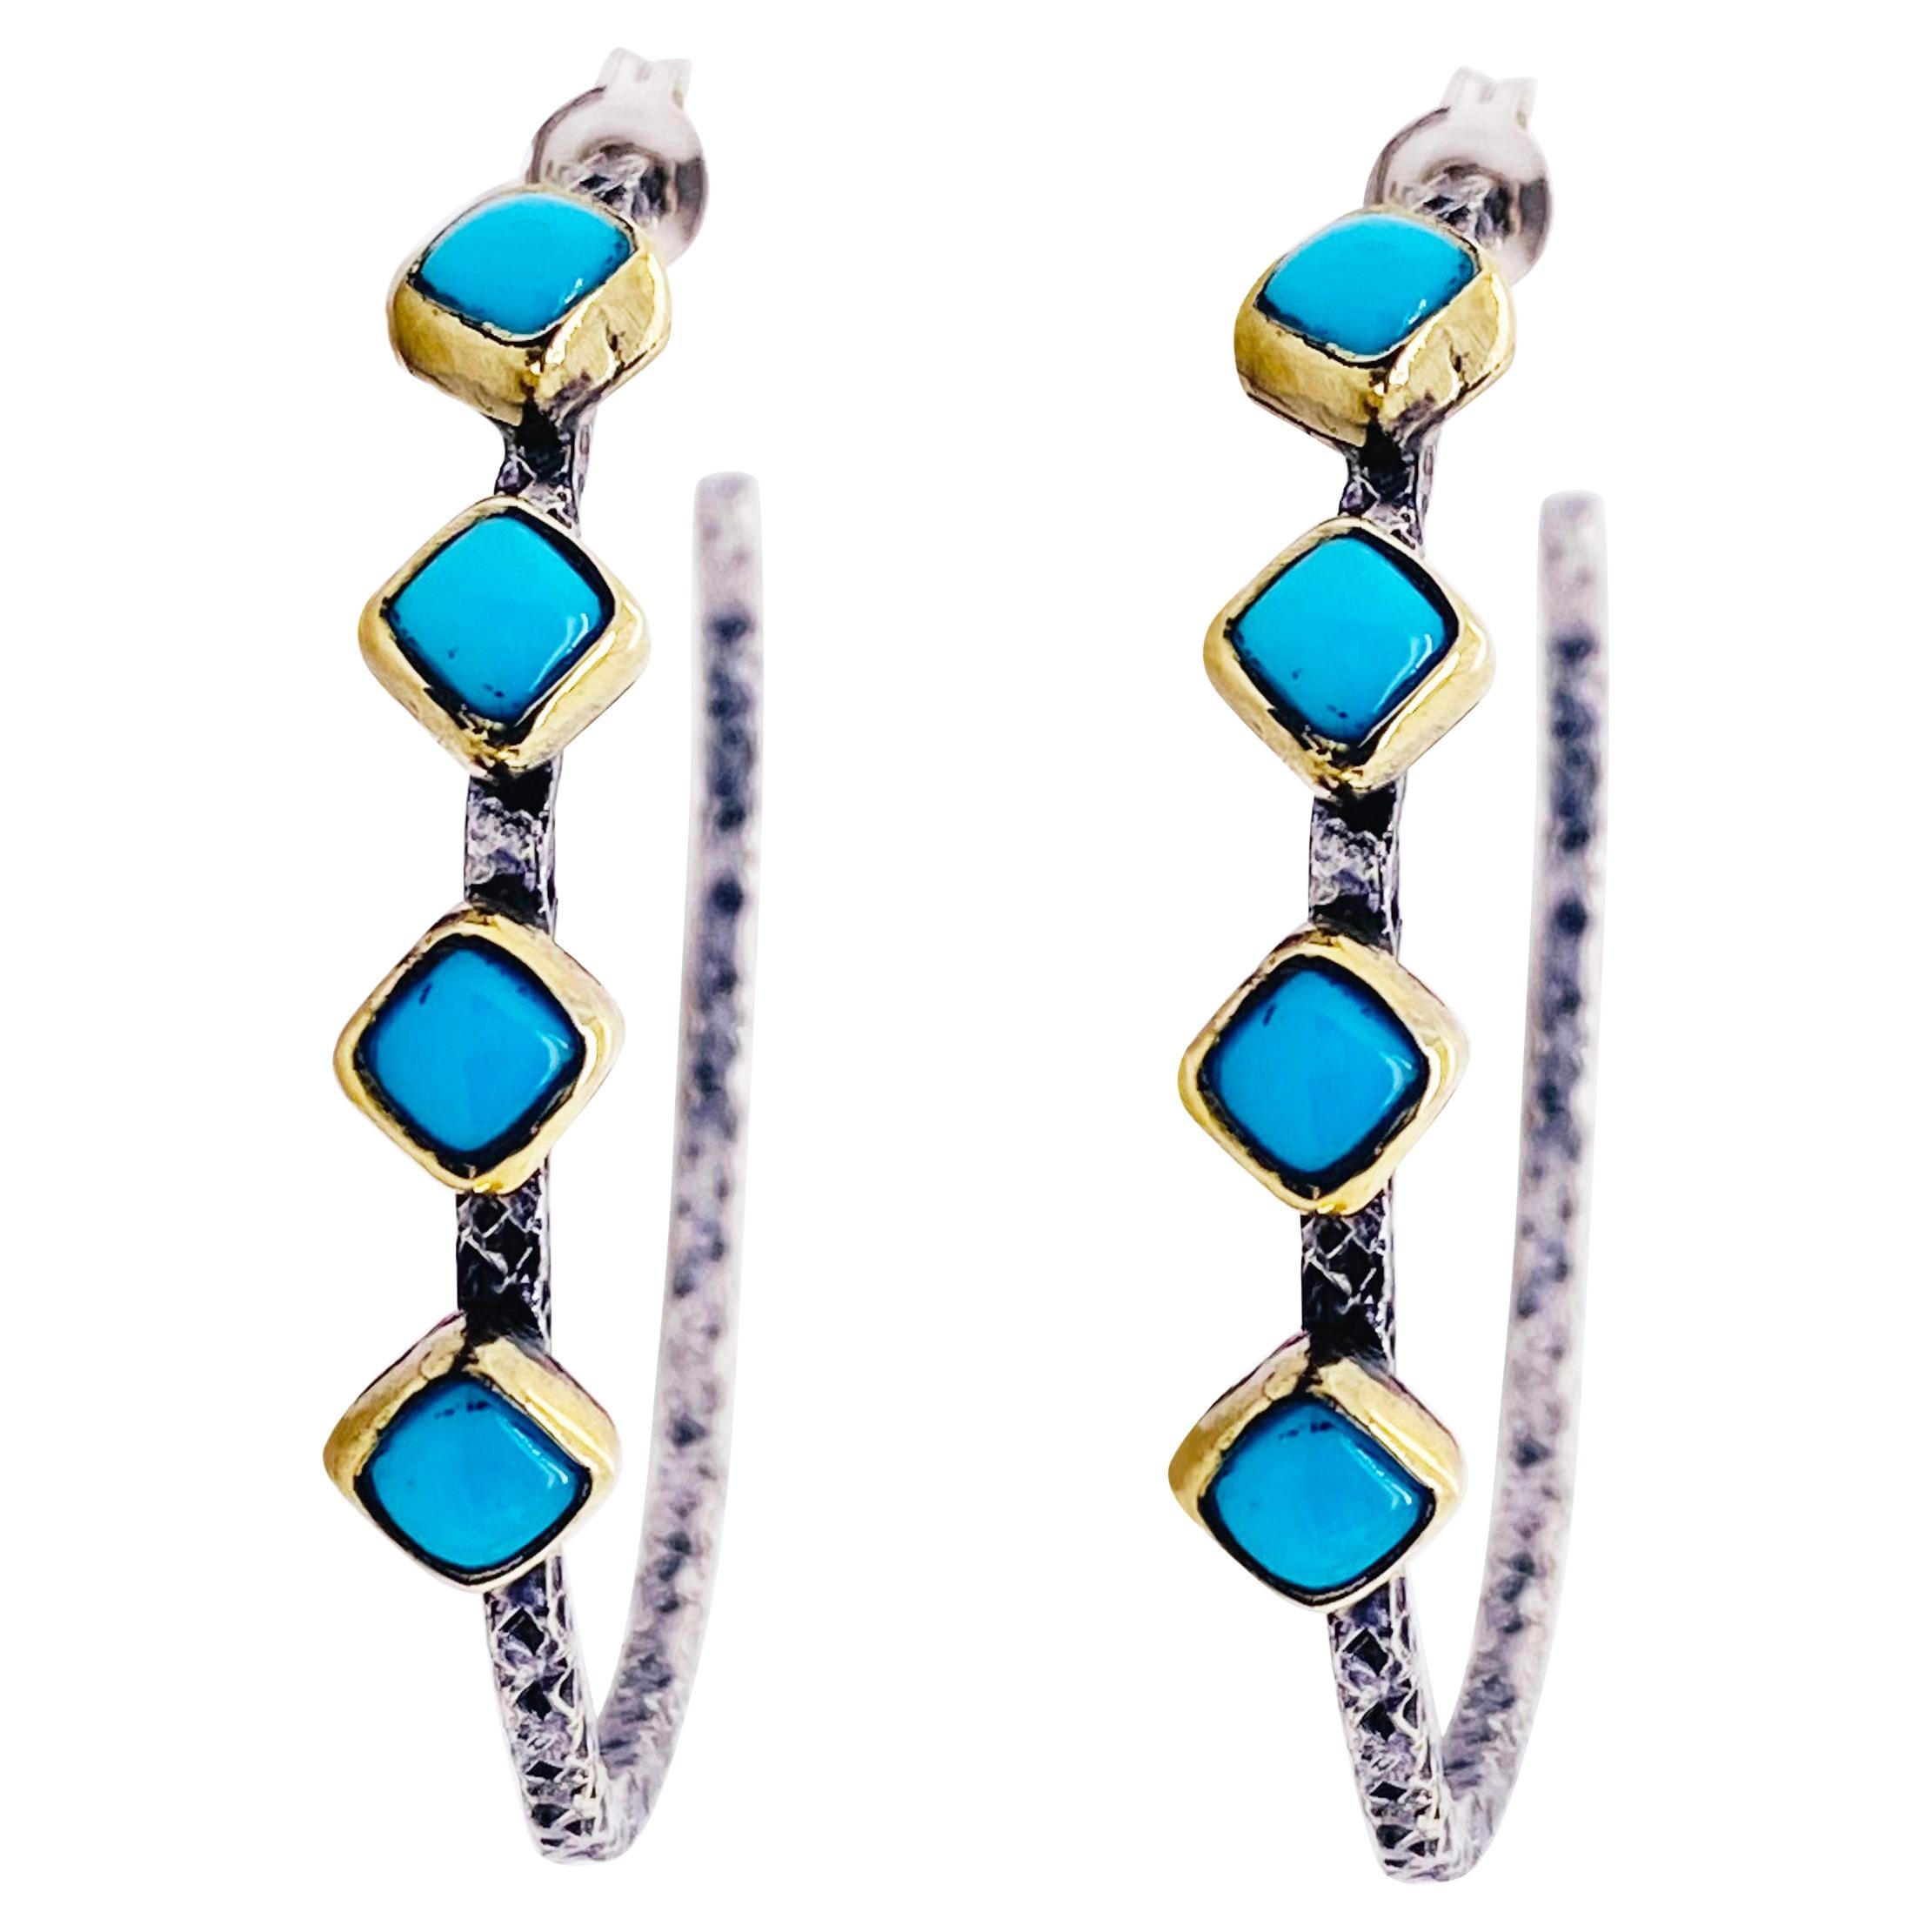 Turquoise Hoop Earrings in Sterling with Turquoise Square Stones Bezel Set